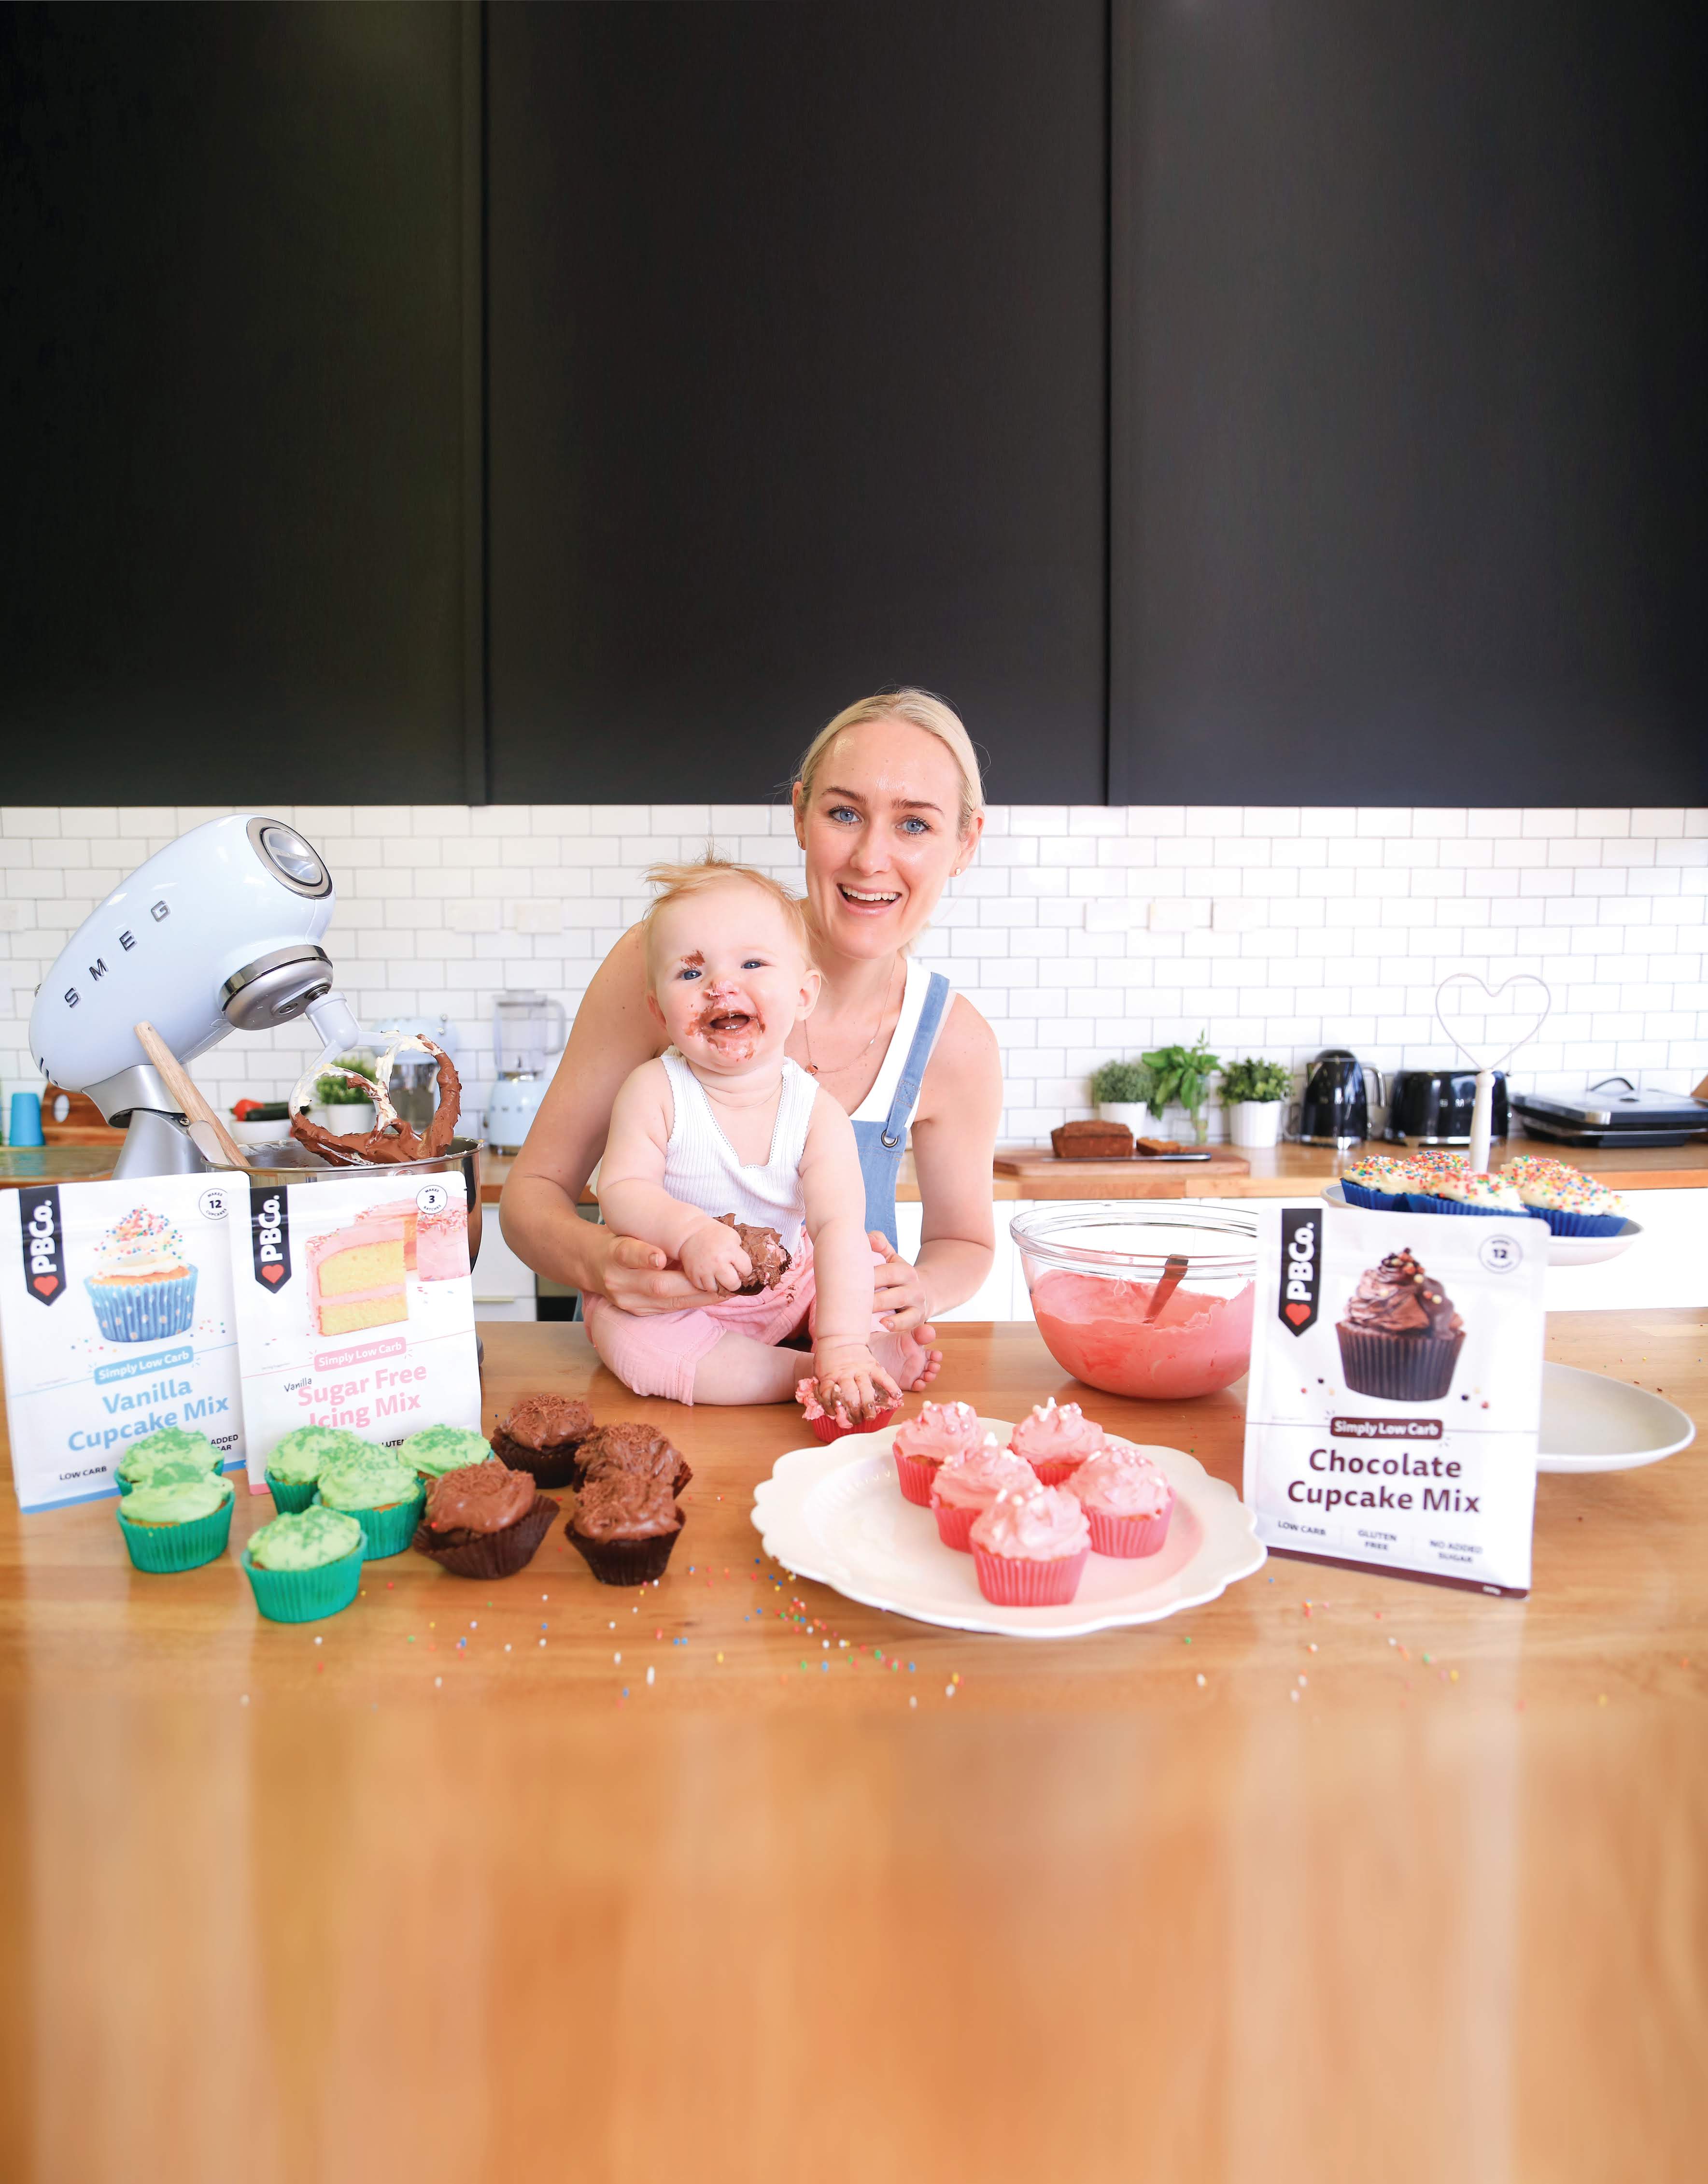 Meet the mum from Bega booming with her low carb baking business